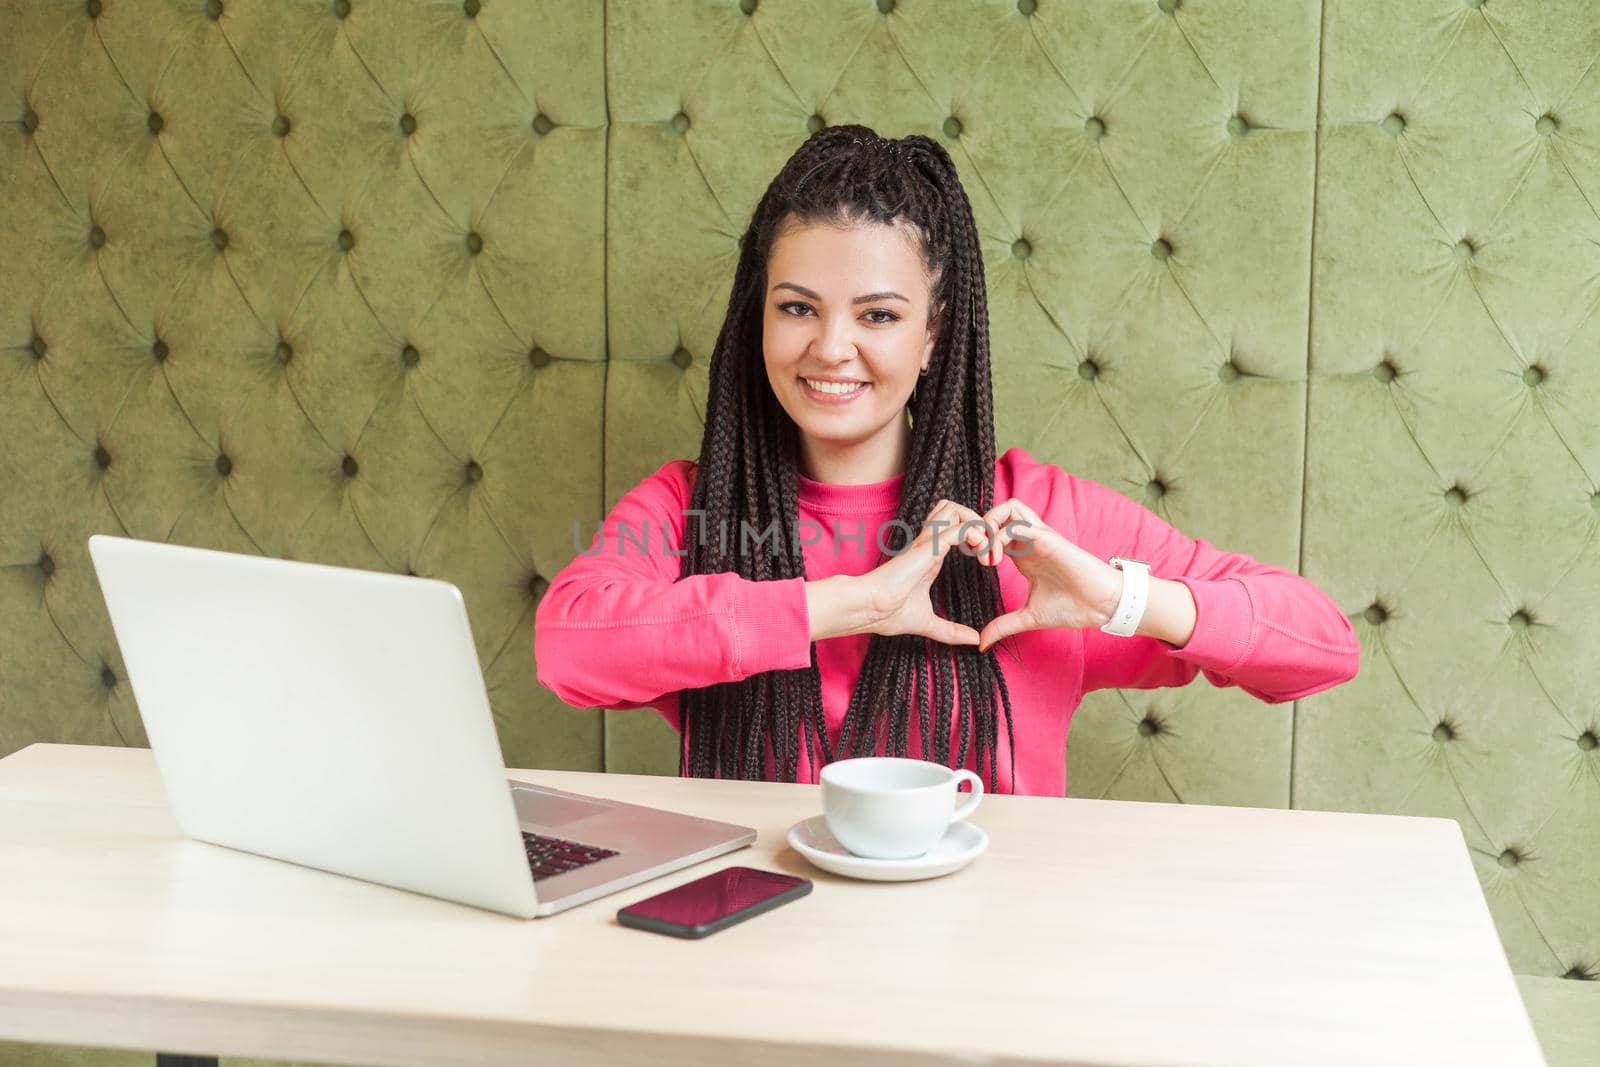 Love you. Portrait of romantic happy young girlfriend with black dreadlocks hairstyle in pink blouse sitting in cafe and showing heart shape with gesture, looking at camera with toothy smile. Indoor